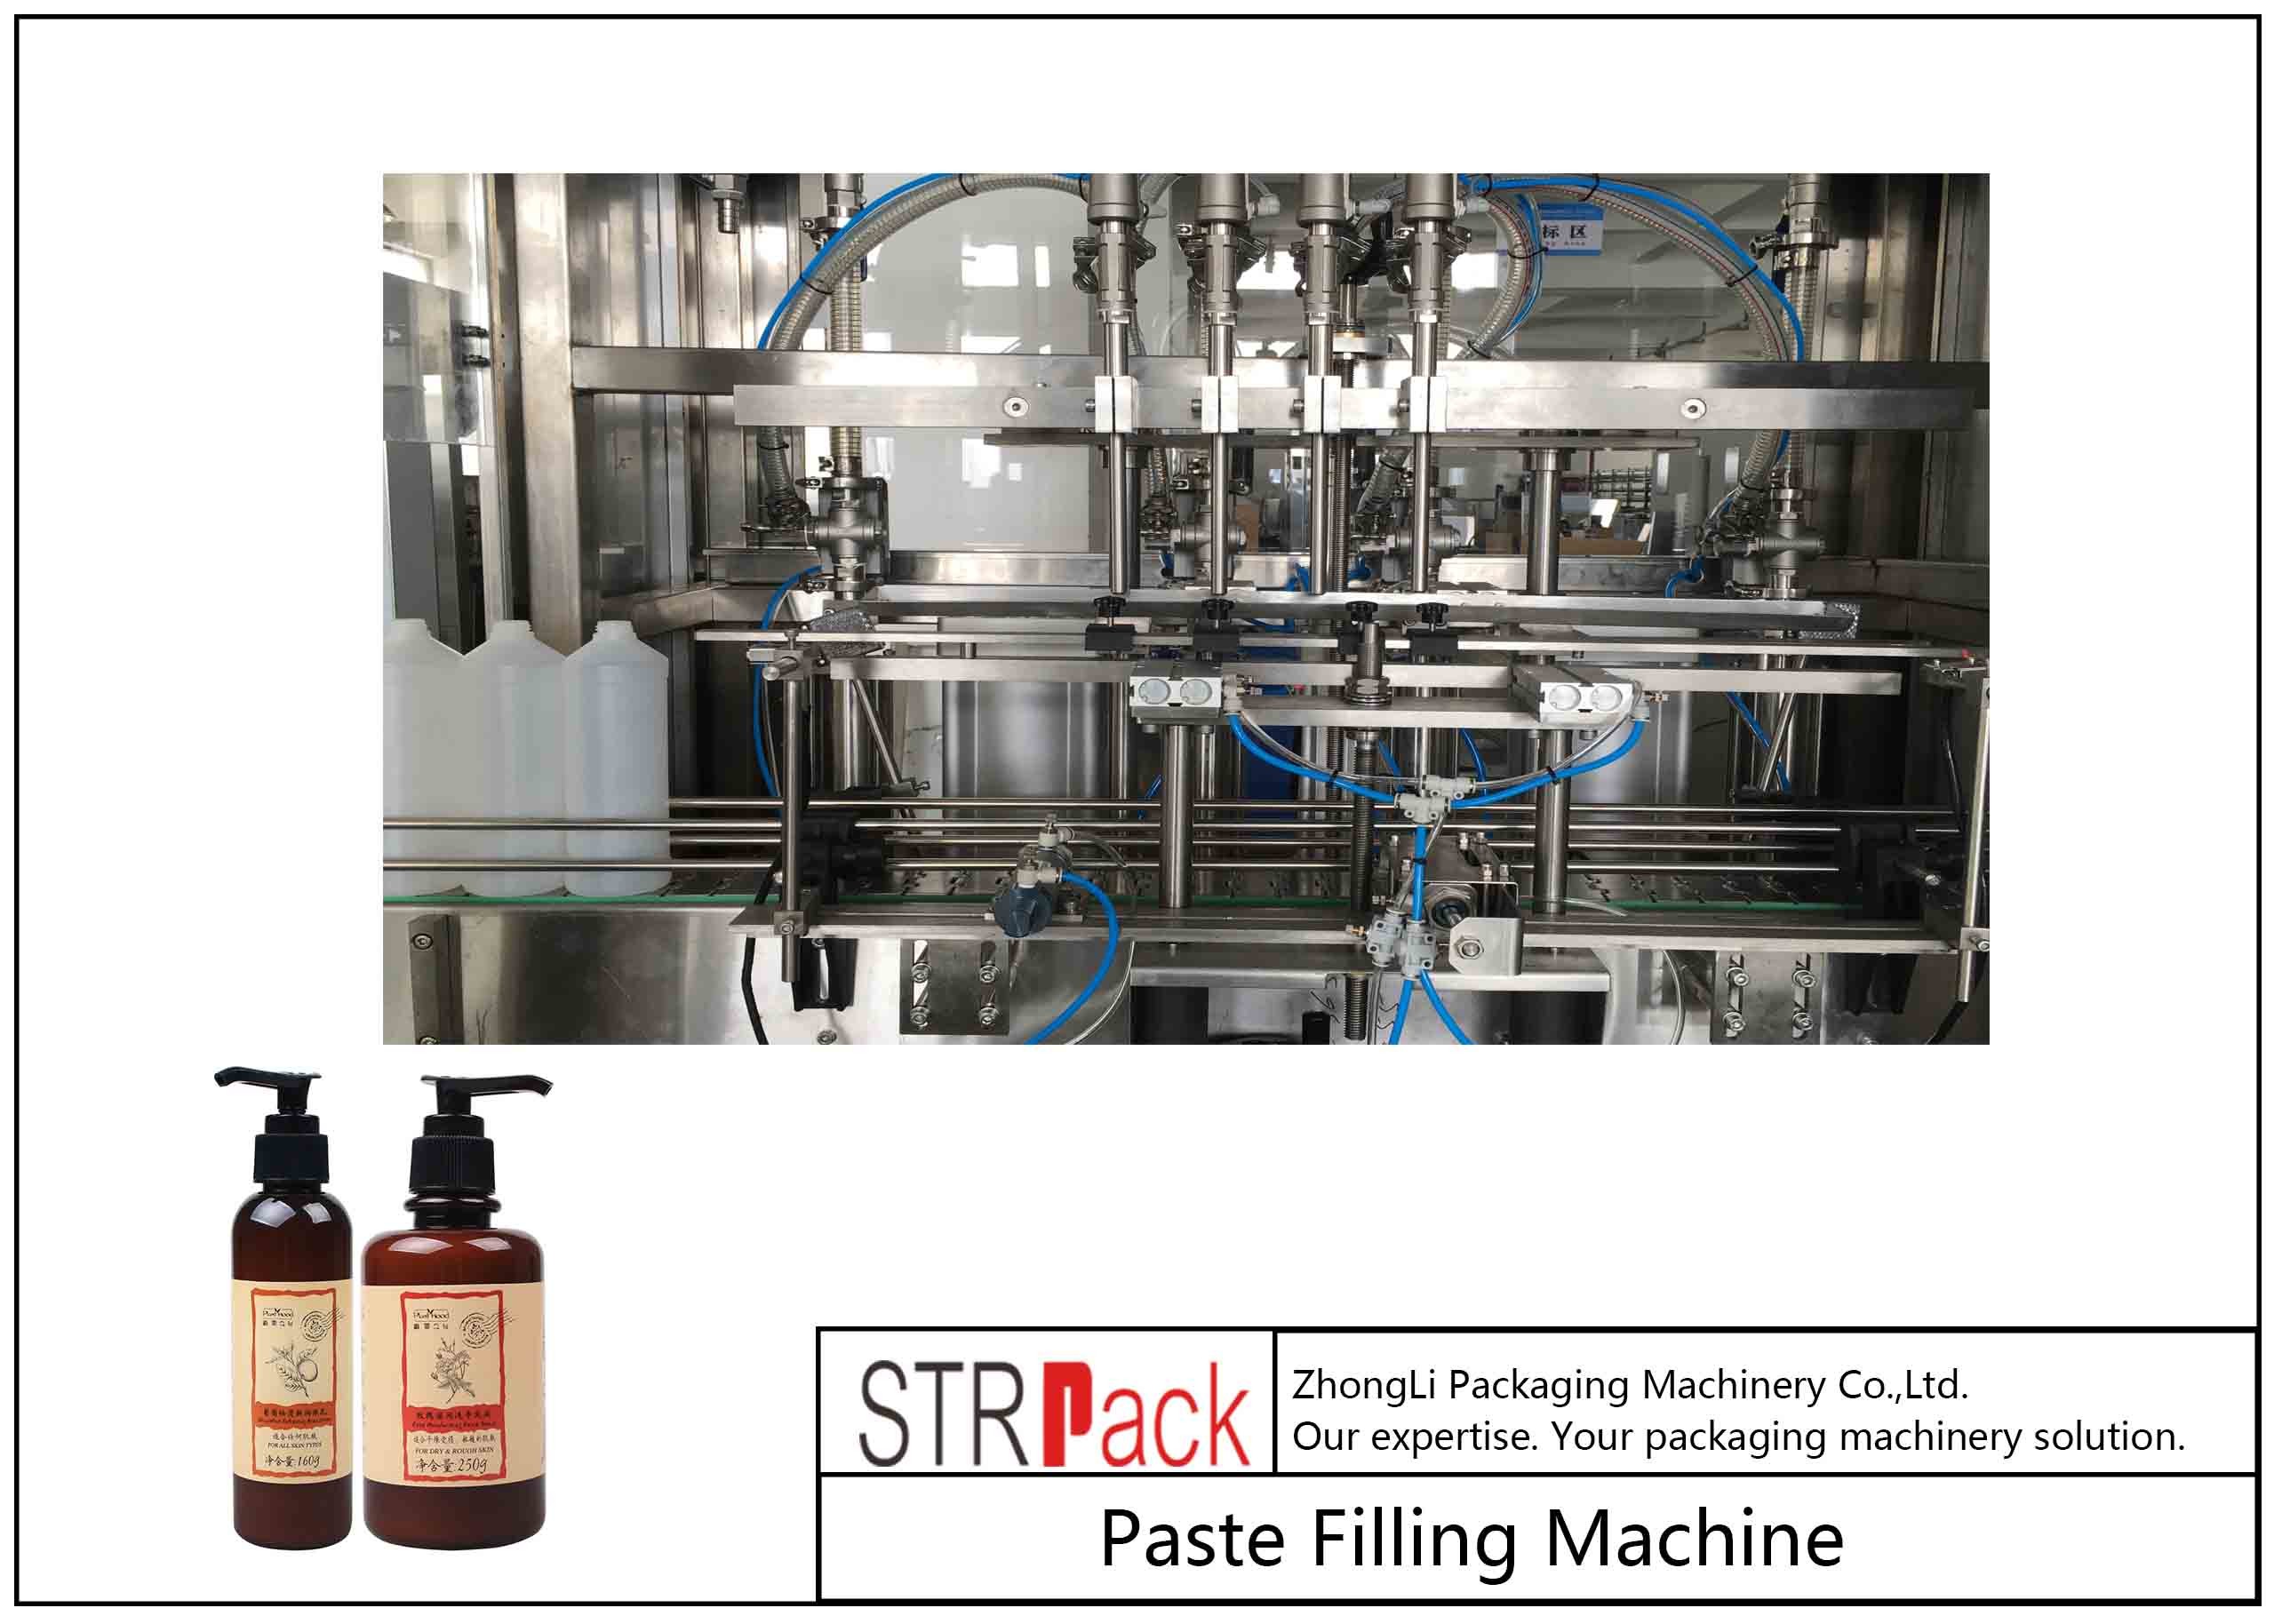 Wholesale 500-2500ml High Accuracy Lotion Filling Equipment With Stainless Steel Tank from china suppliers